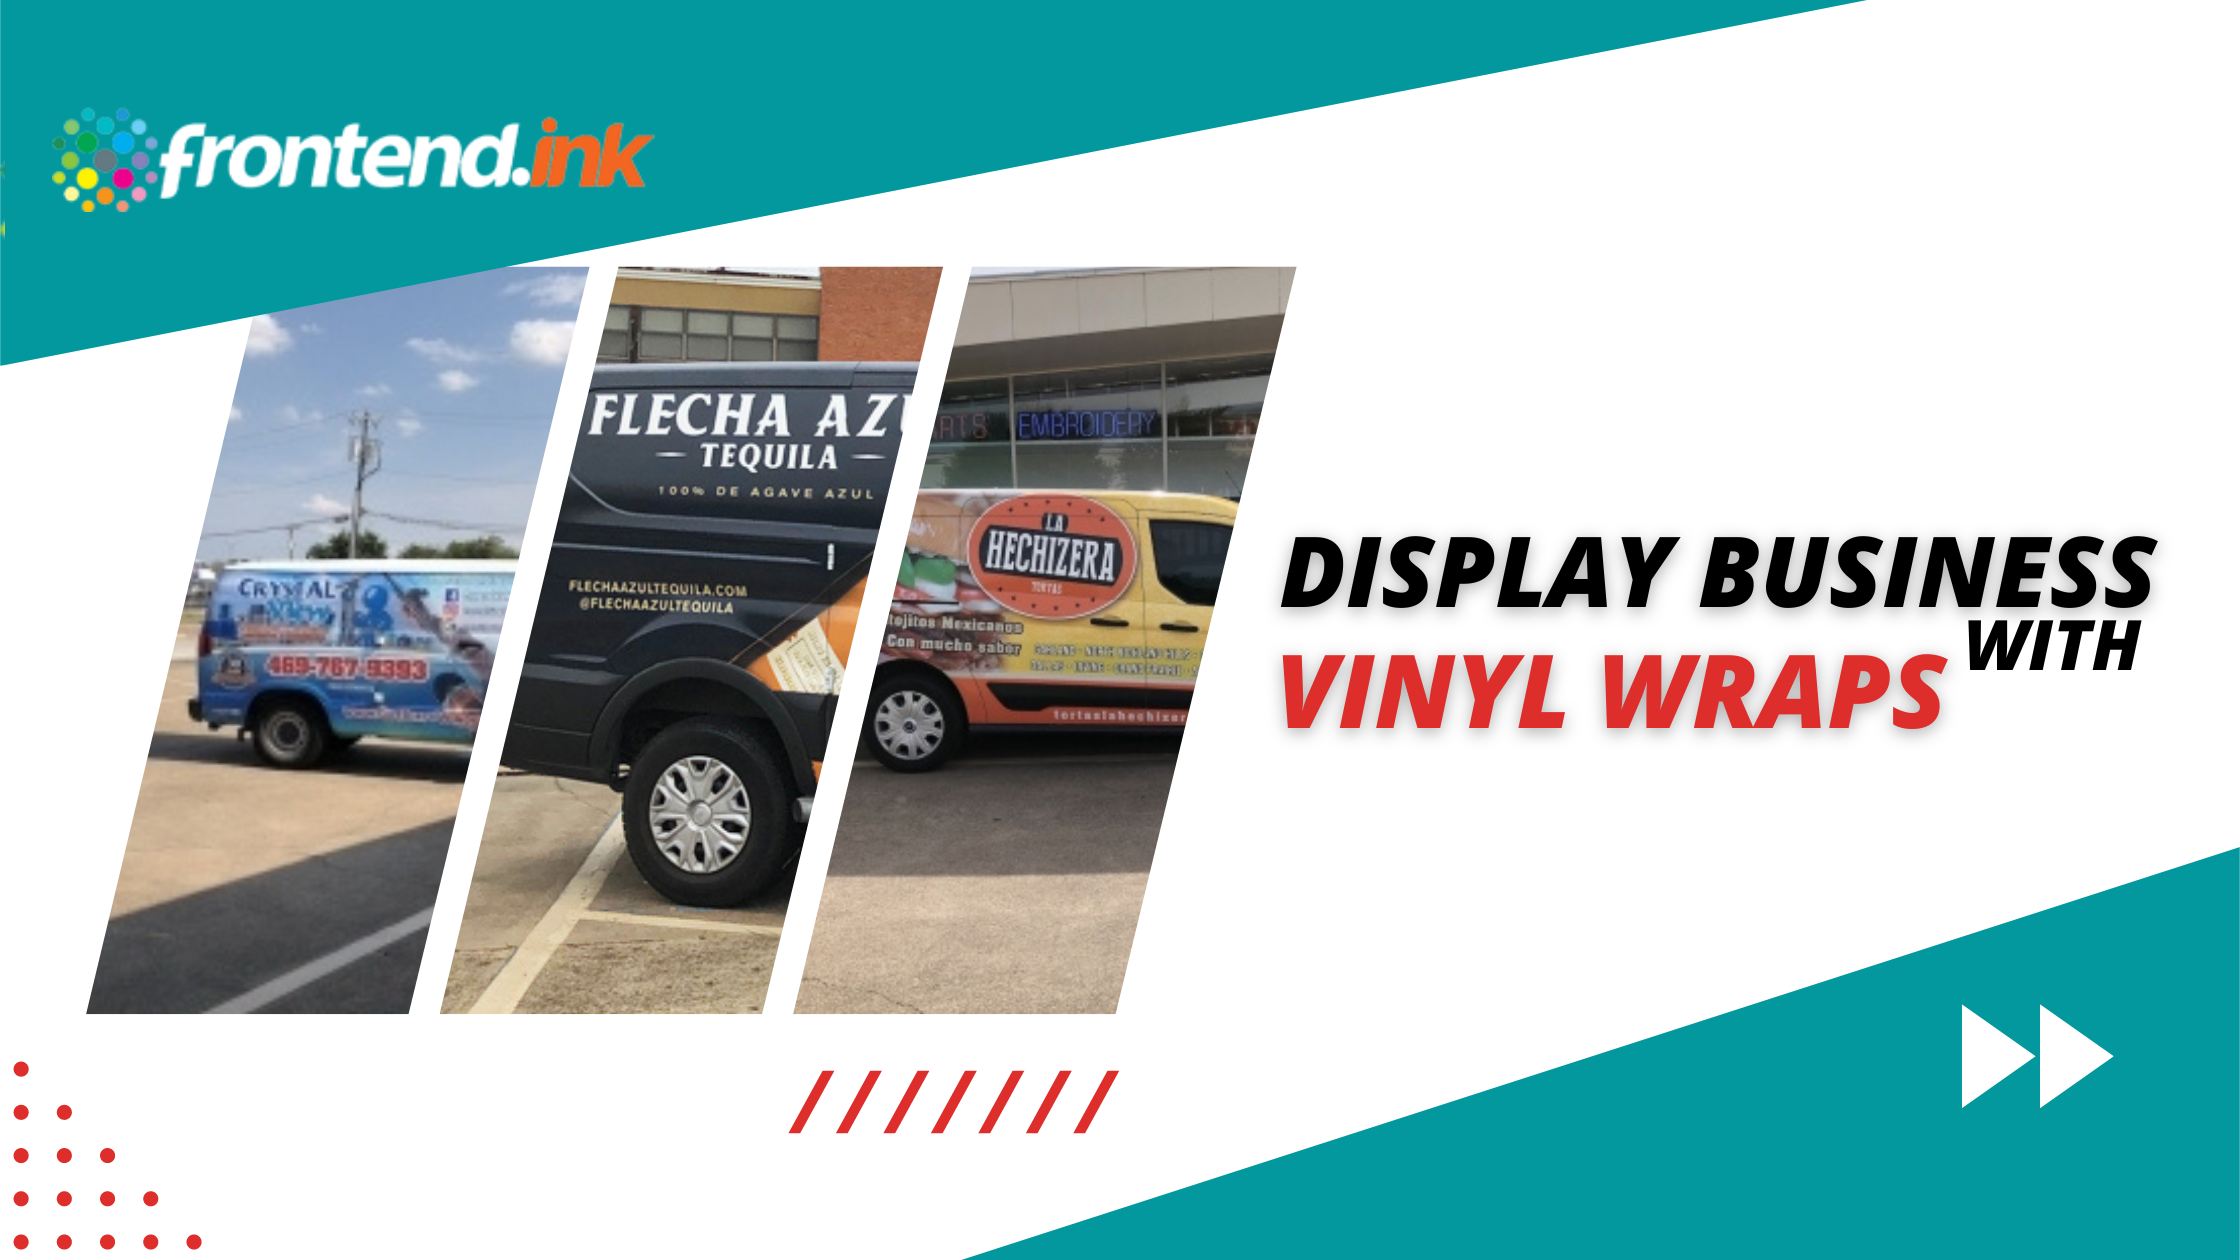 Which Information Should Be Displayed on Business Vehicle Vinyl Wraps?